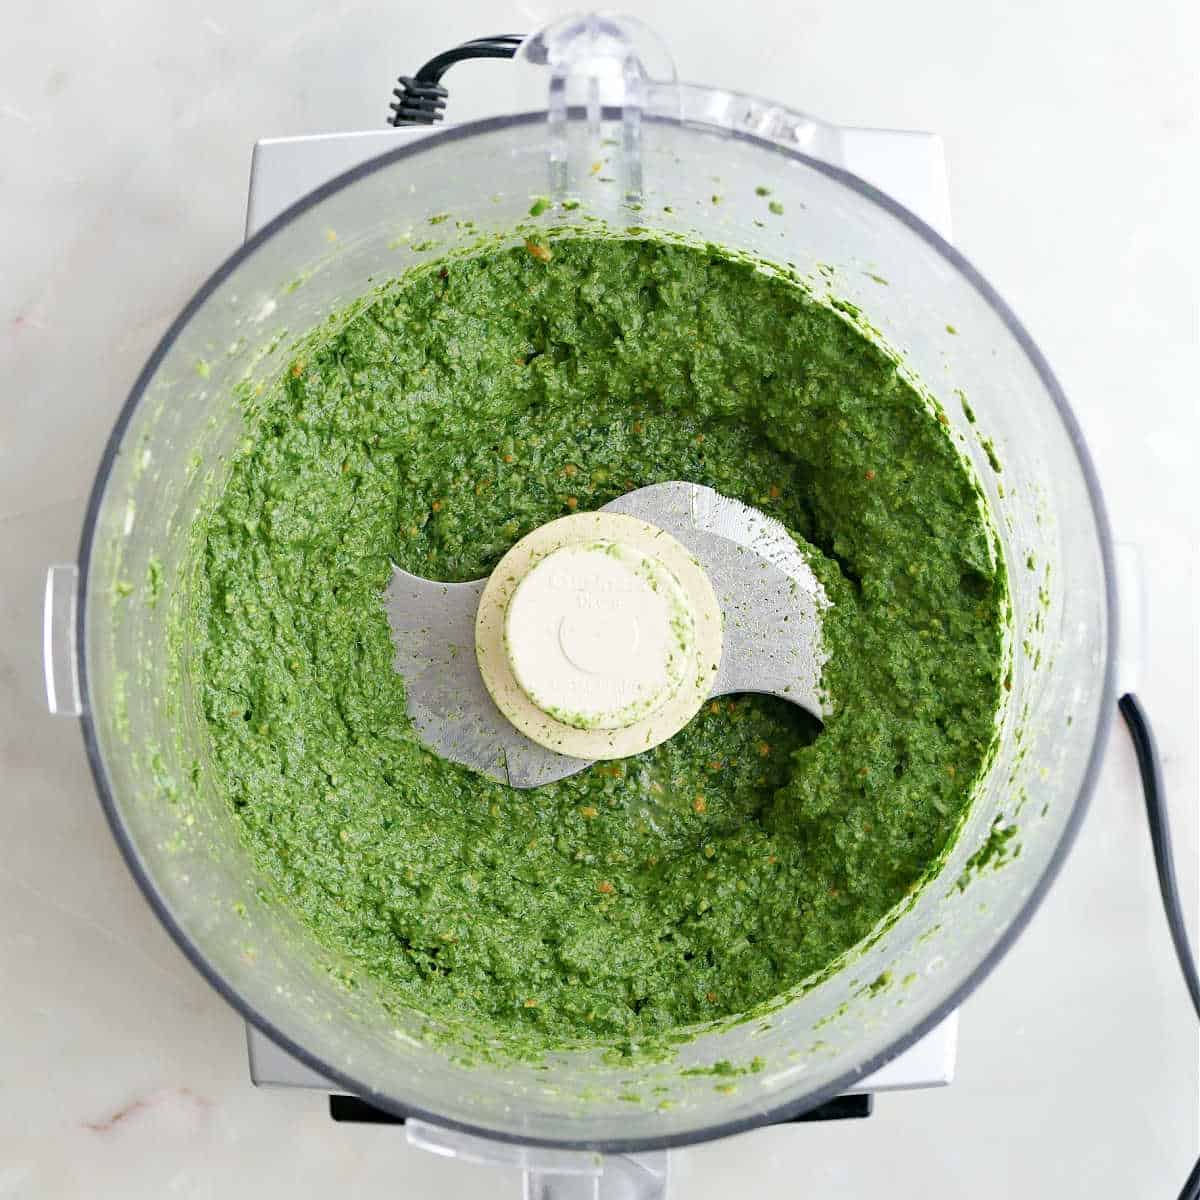 Blended green pasta sauce in a food processor on a counter.